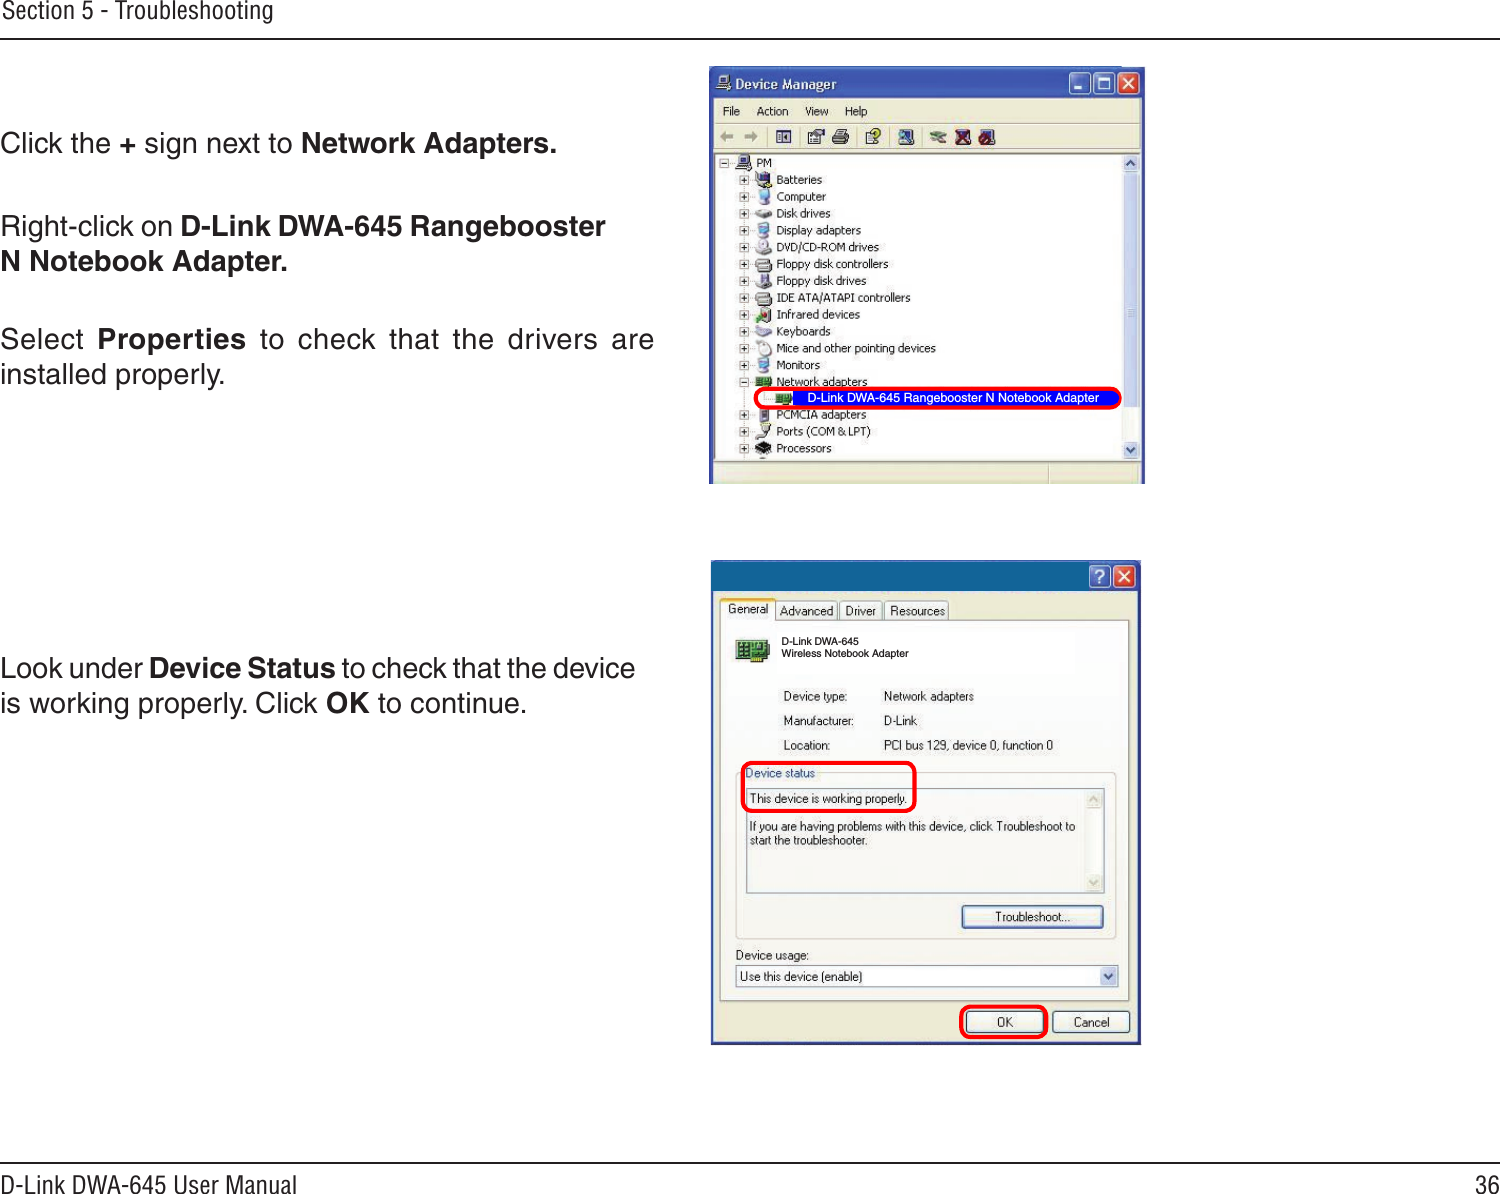 36D-Link DWA-645 User ManualSection 5 - TroubleshootingClick the + sign next to Network Adapters.Right-click on D-Link DWA-645 Rangebooster N Notebook Adapter.Select  Properties  to  check  that  the  drivers  are installed properly.Look under Device Status to check that the device is working properly. Click OK to continue.D-Link DWA-645 Rangebooster N Notebook AdapterD-Link DWA-645 Wireless Notebook Adapter